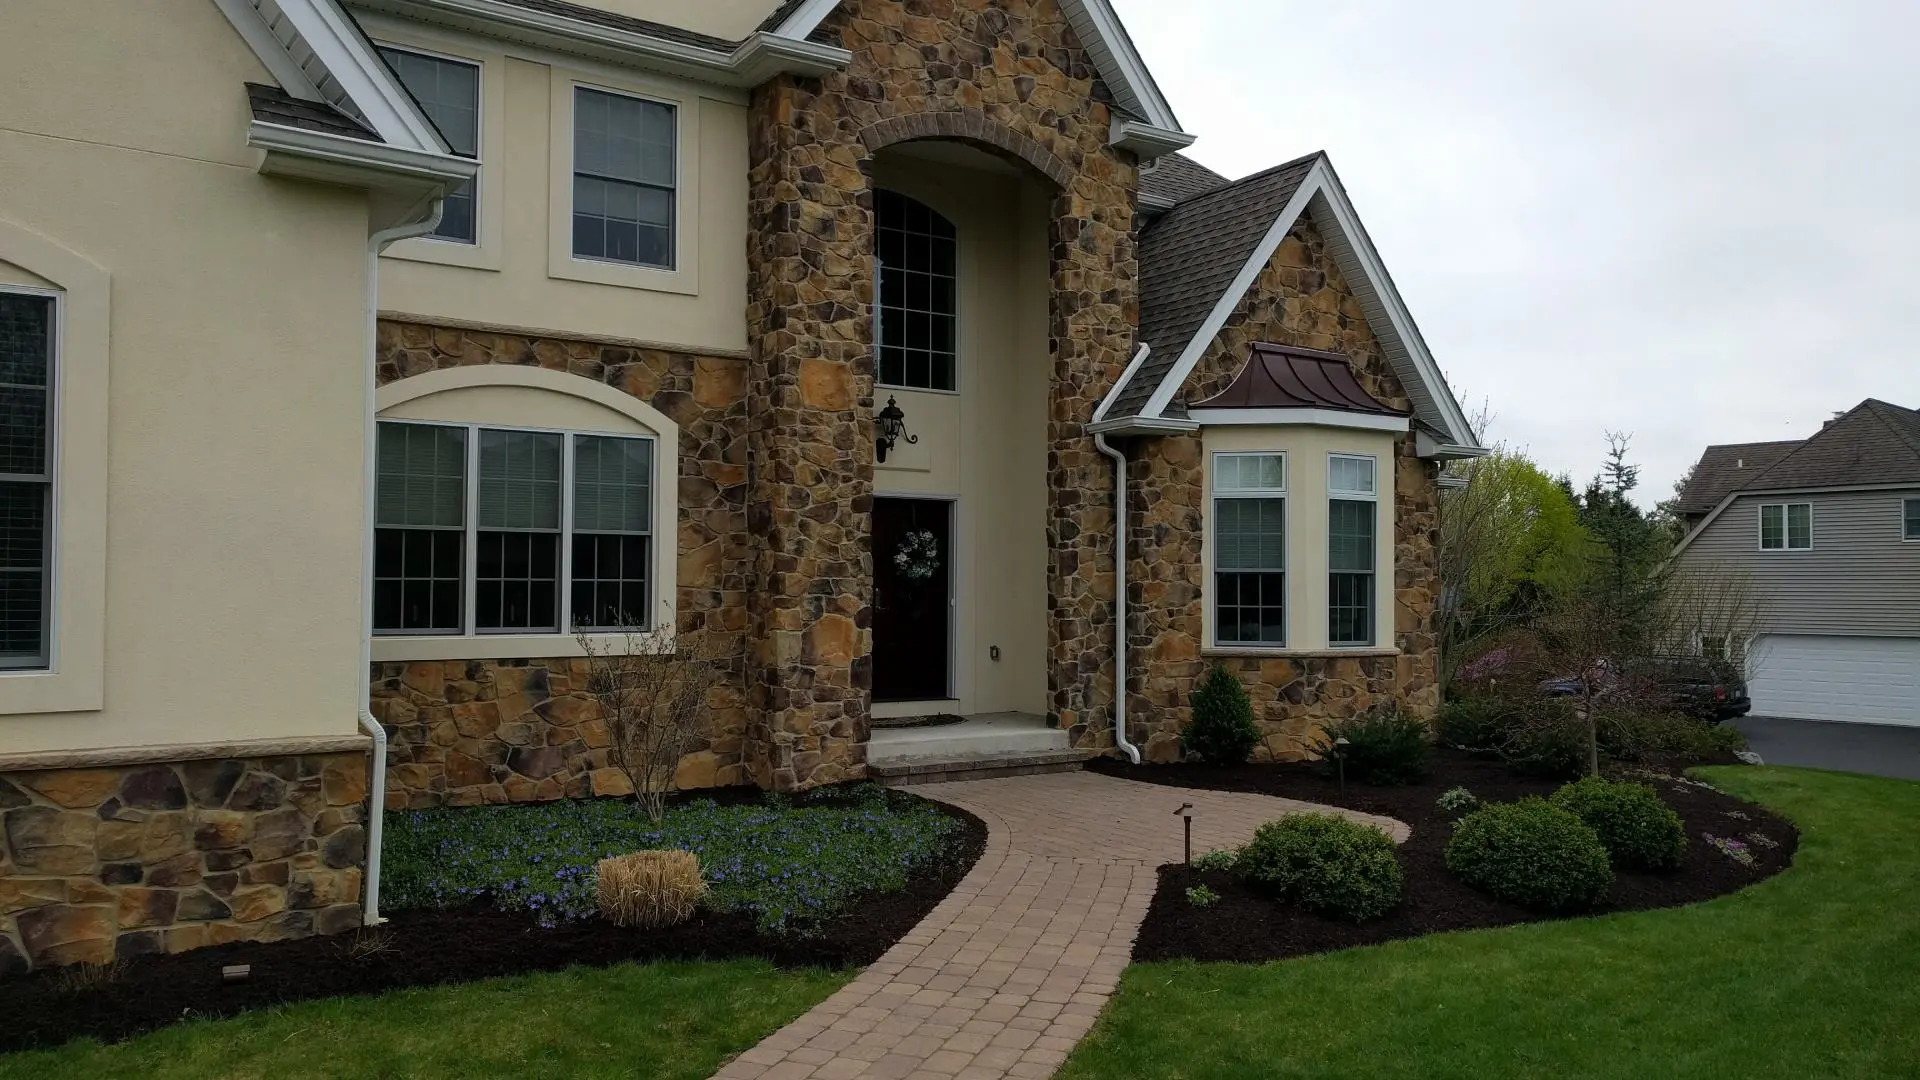 Large home with maintained landscaping in Orefield, PA.